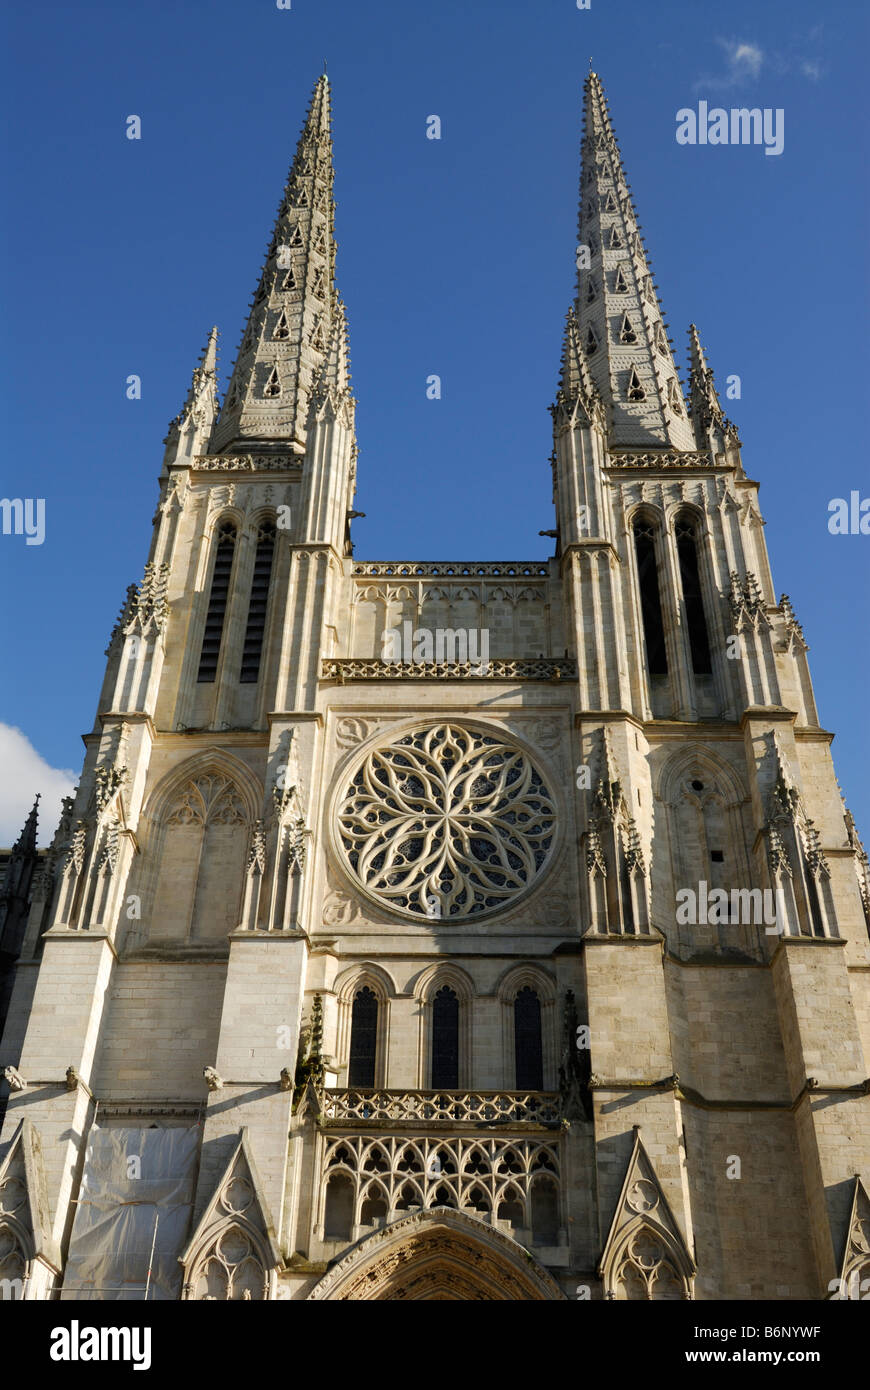 Bordeaux France Cathedral St Andre on Place Pey Berland Stock Photo